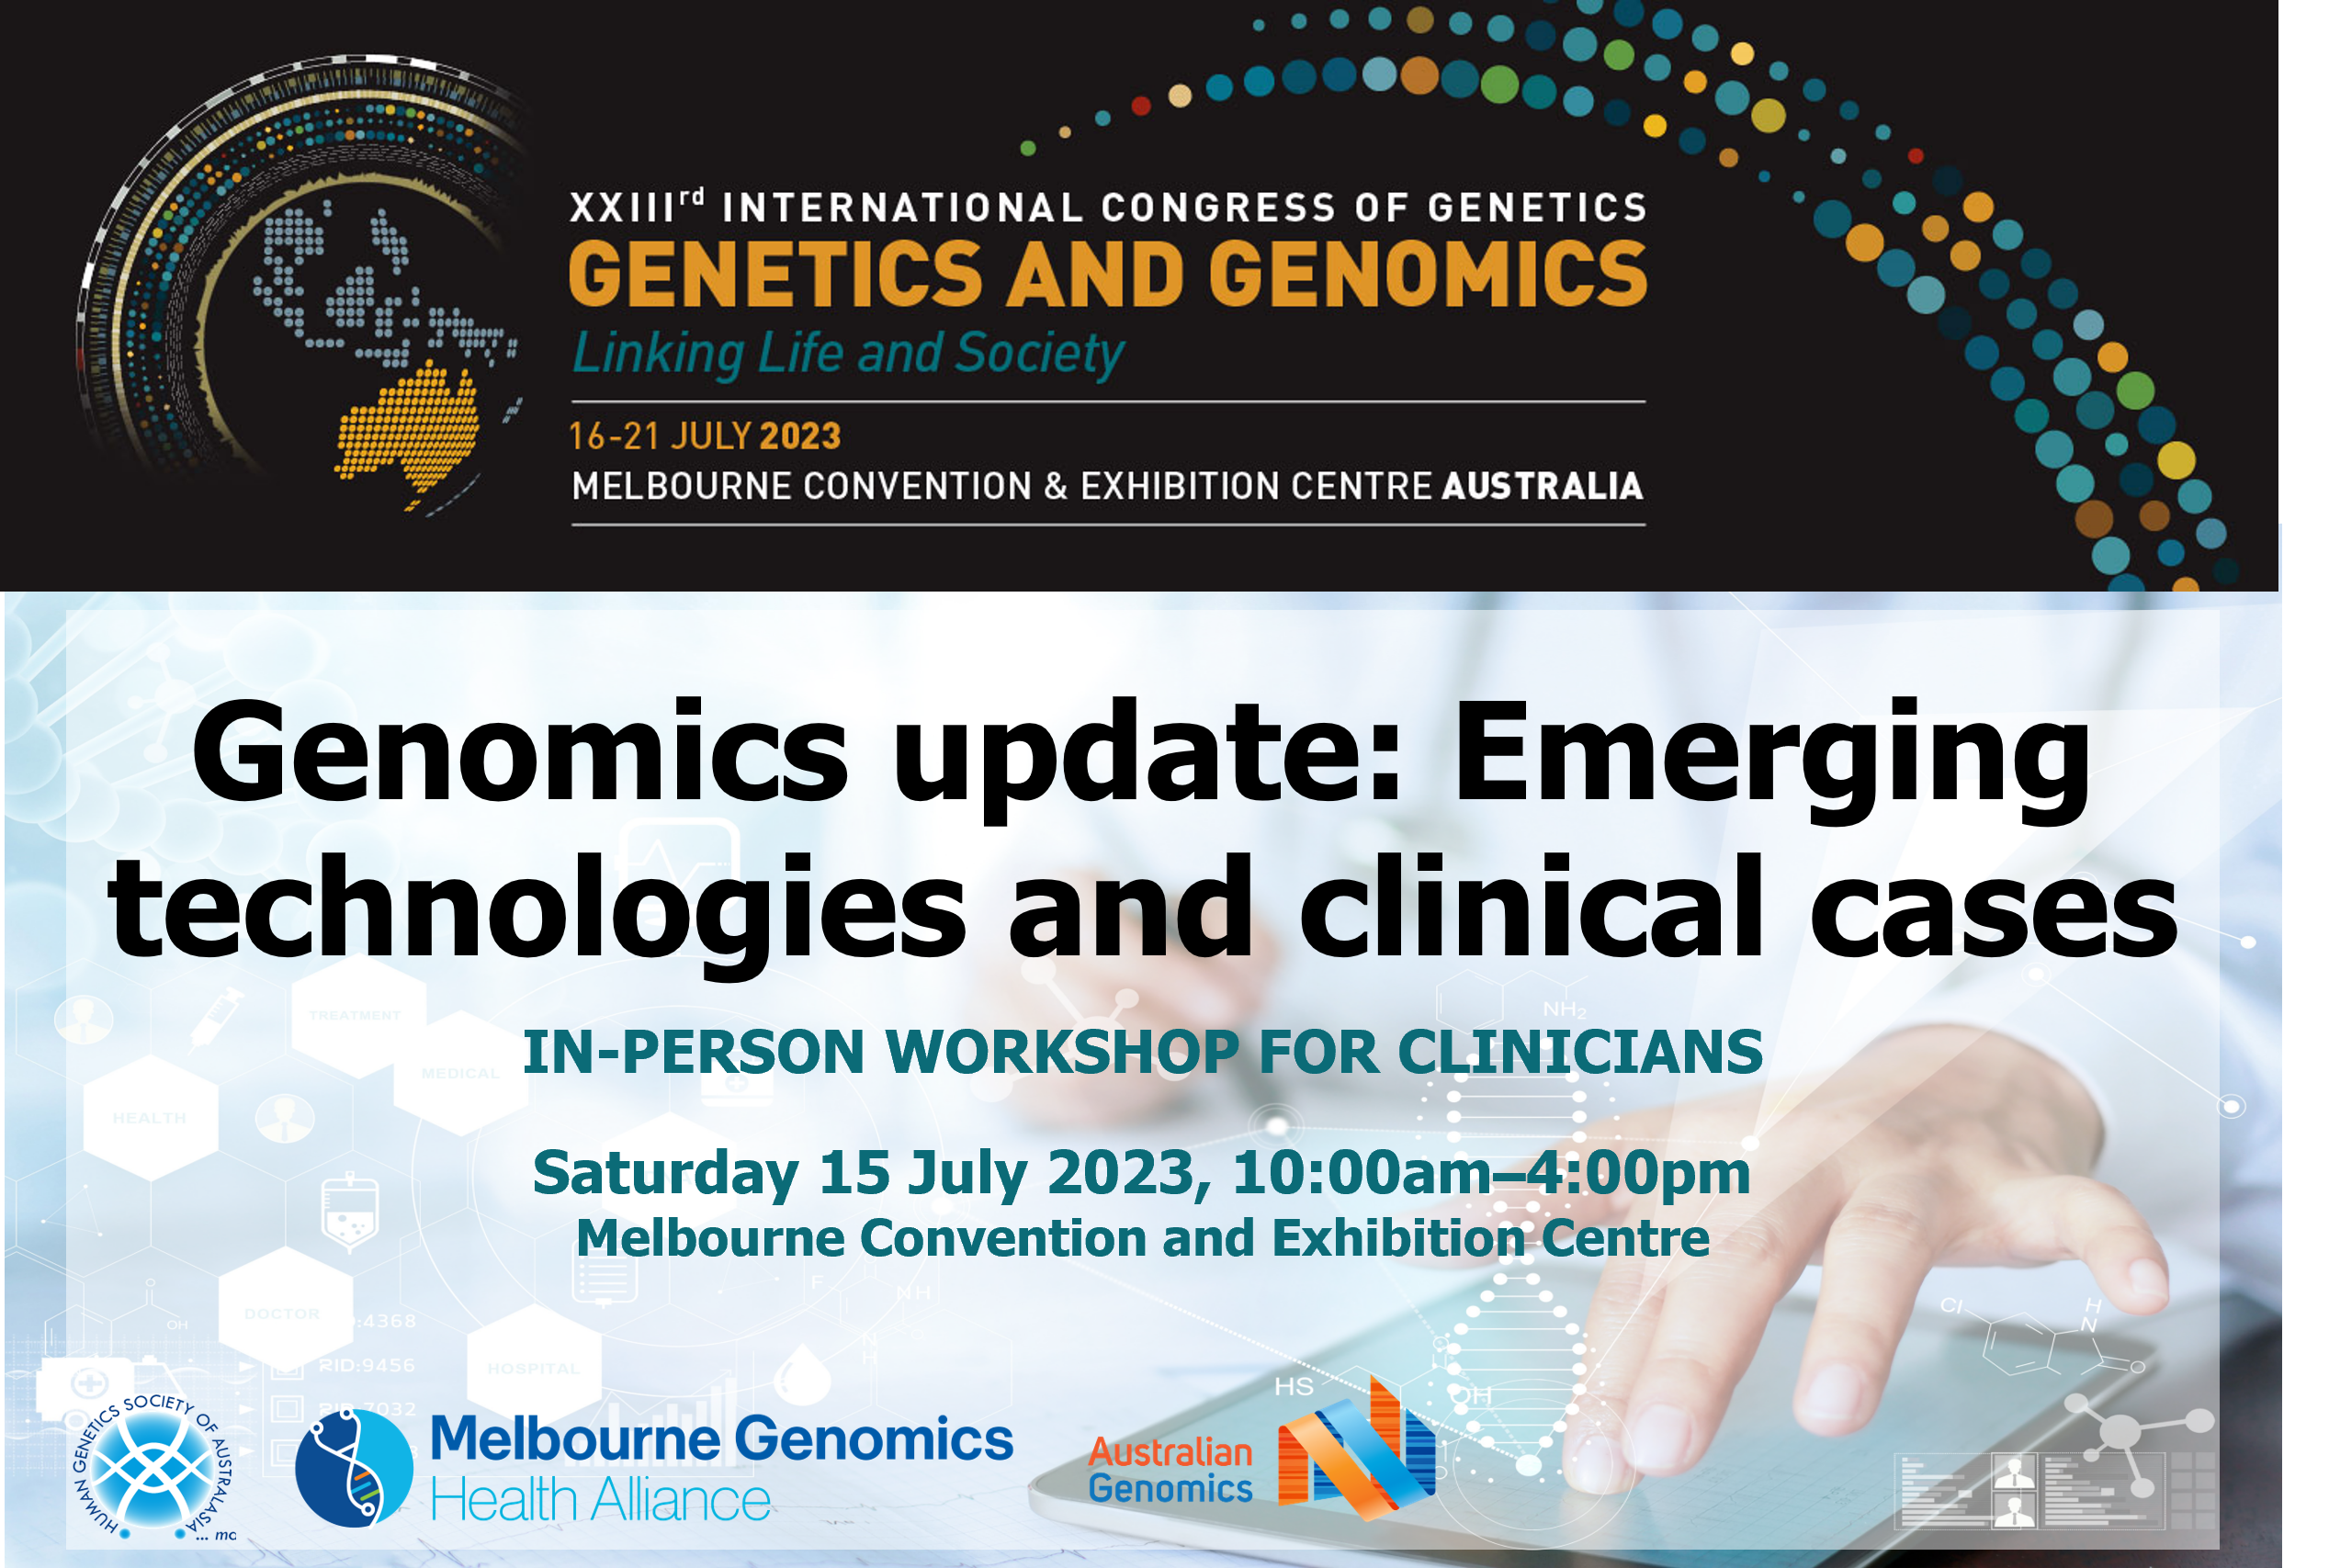 Genomics update: Emerging technologies and clinical cases. In-person workshop for clinicians. Saturday 15 July, 10am-4pm. Melbourne Convention and Exhibition Centre.